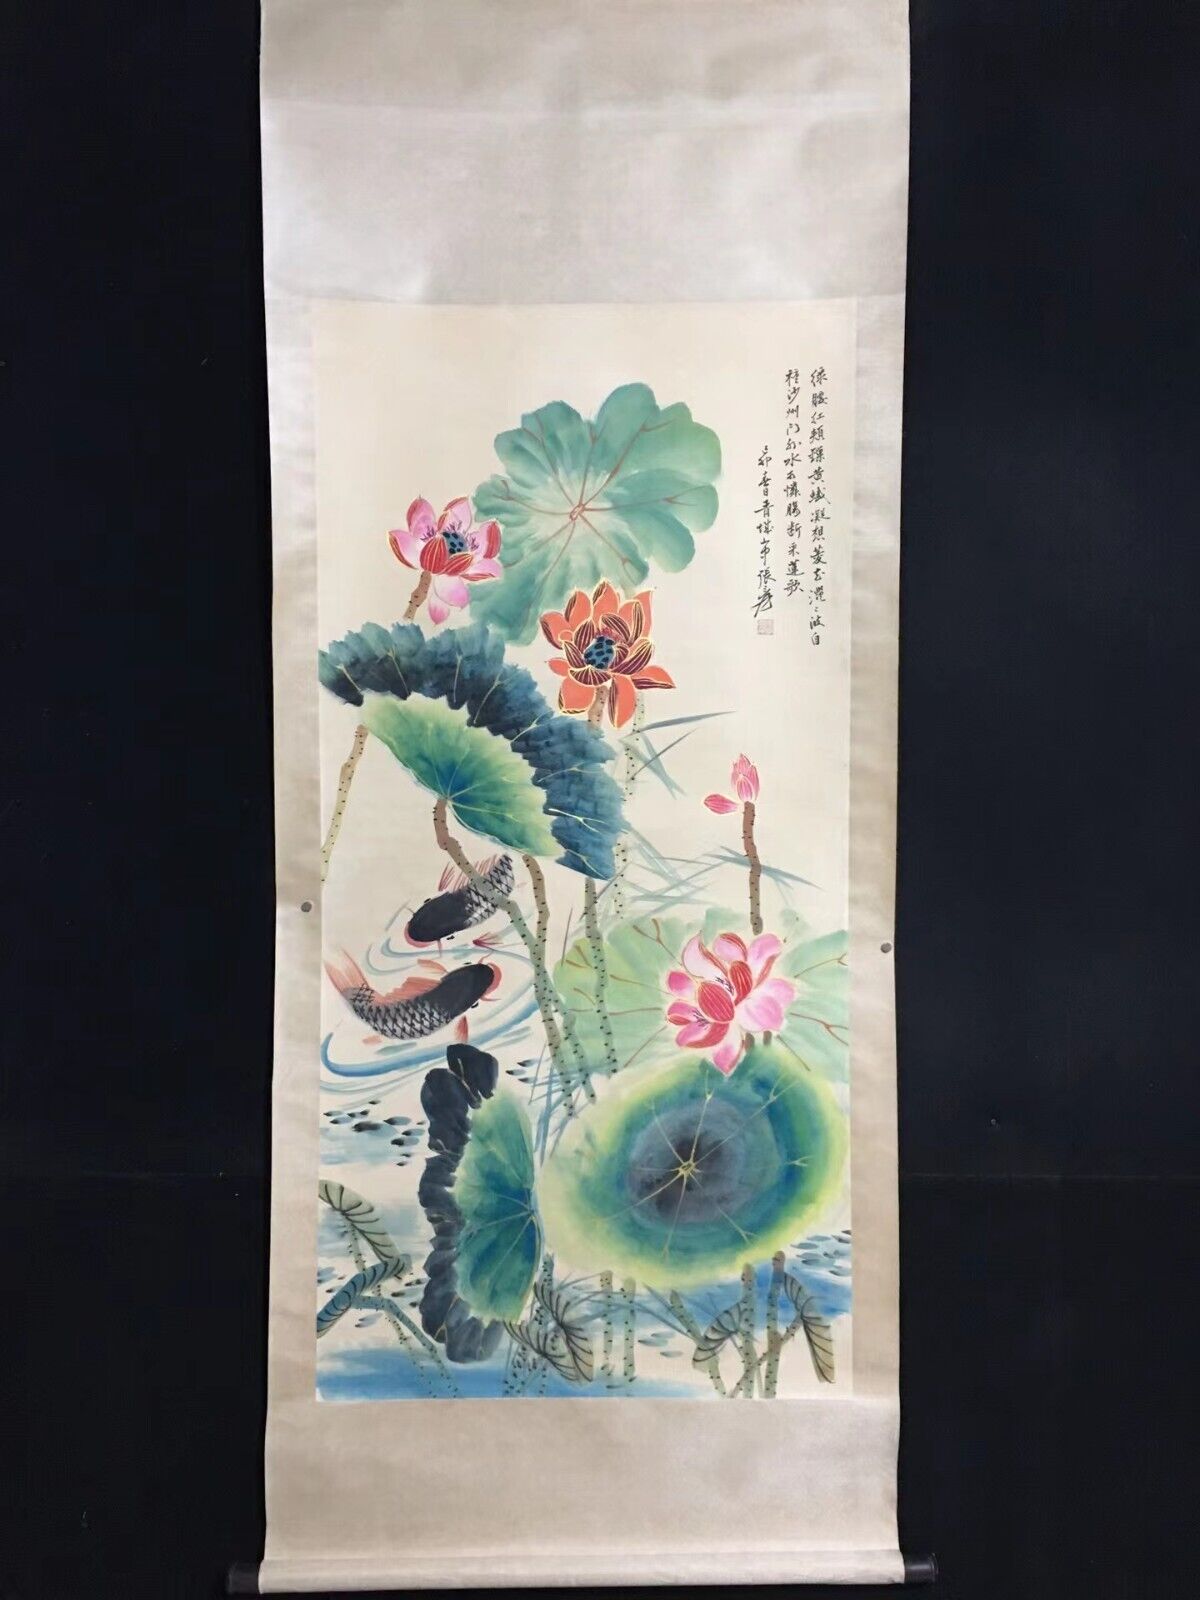 Old Chinese Hand Painting Scroll Lotus and Fish by Zhang Daqian 张大千 荷花鱼